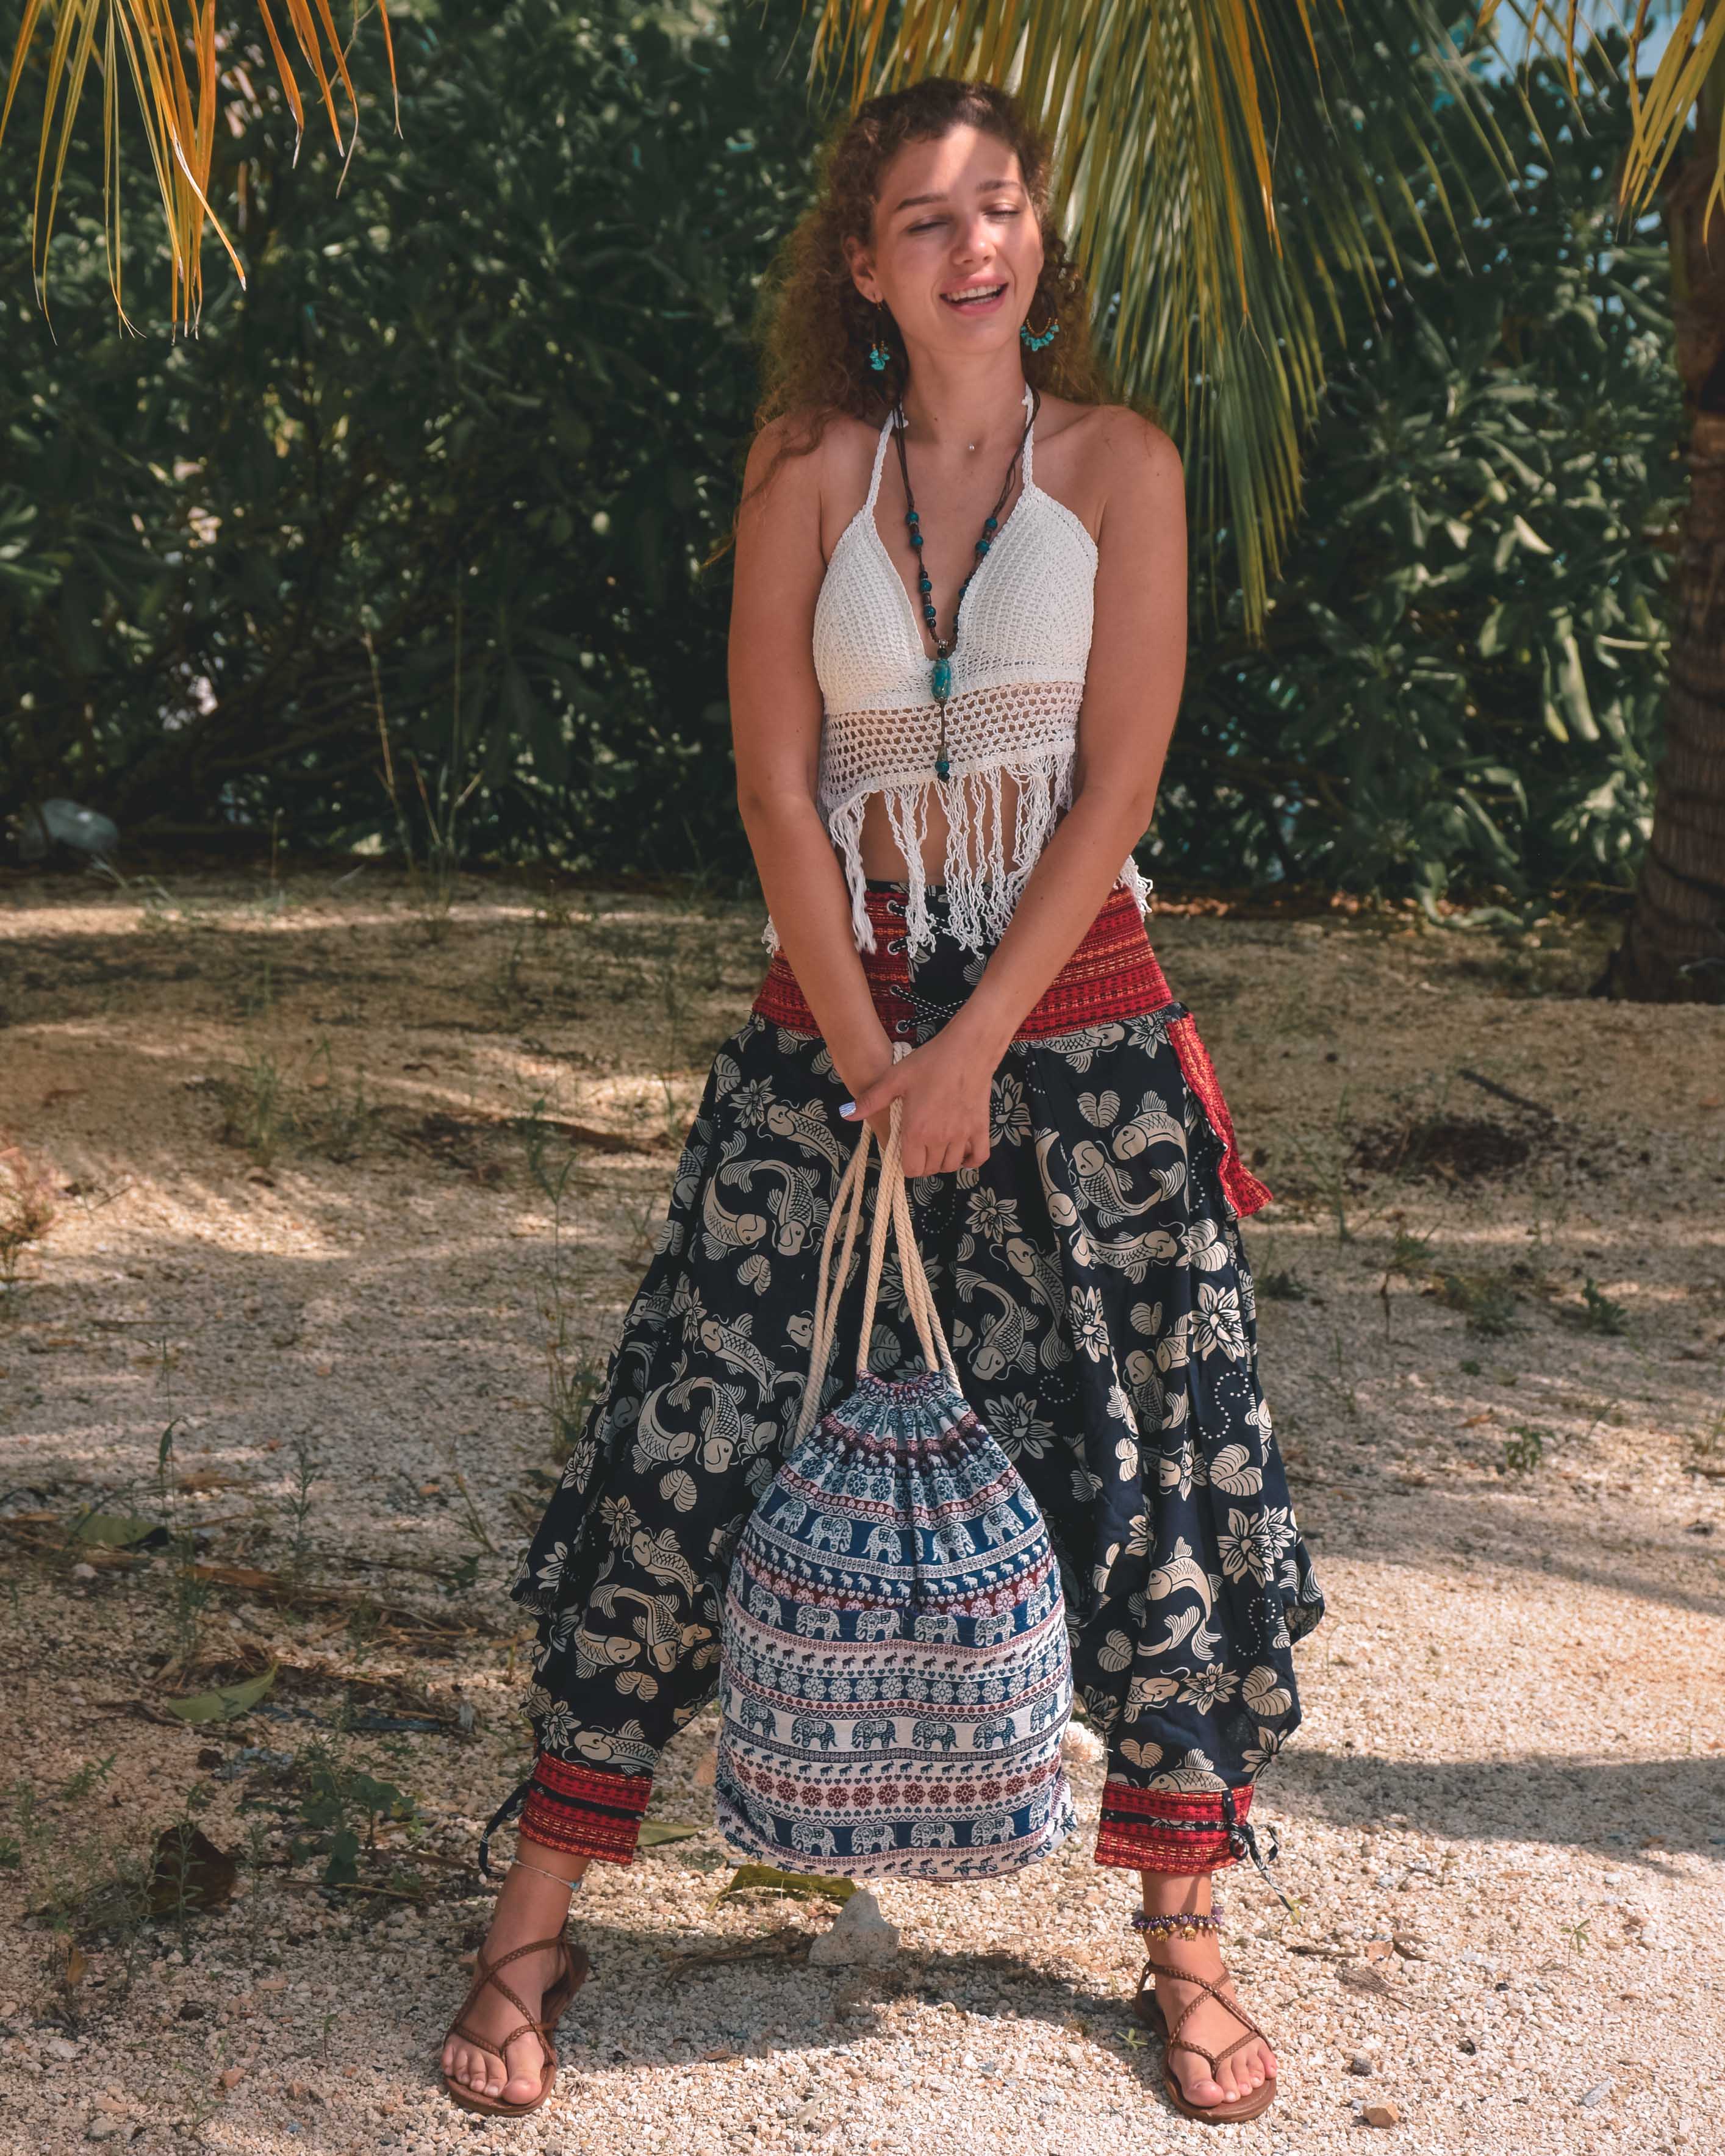 ITZA DRAWSTRING BAG Elepanta Travel Bags - Buy Today Elephant Pants Jewelry And Bohemian Clothes Handmade In Thailand Help To Save The Elephants FairTrade And Vegan